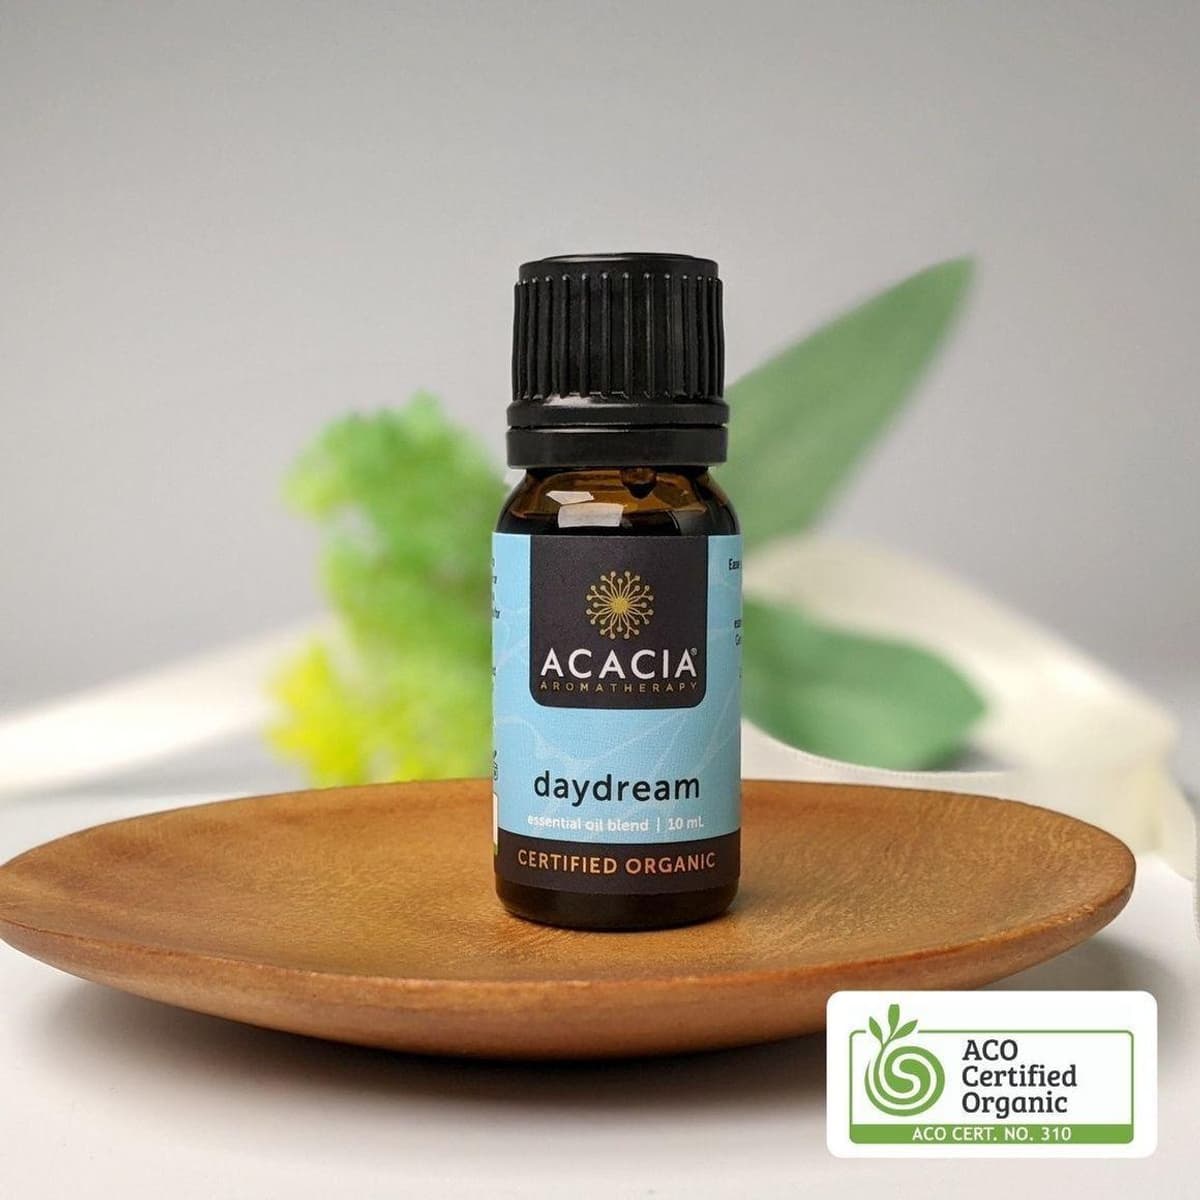 ACACIA AROMATHERAPY Daydream Certified Organic Essential Oil Blend